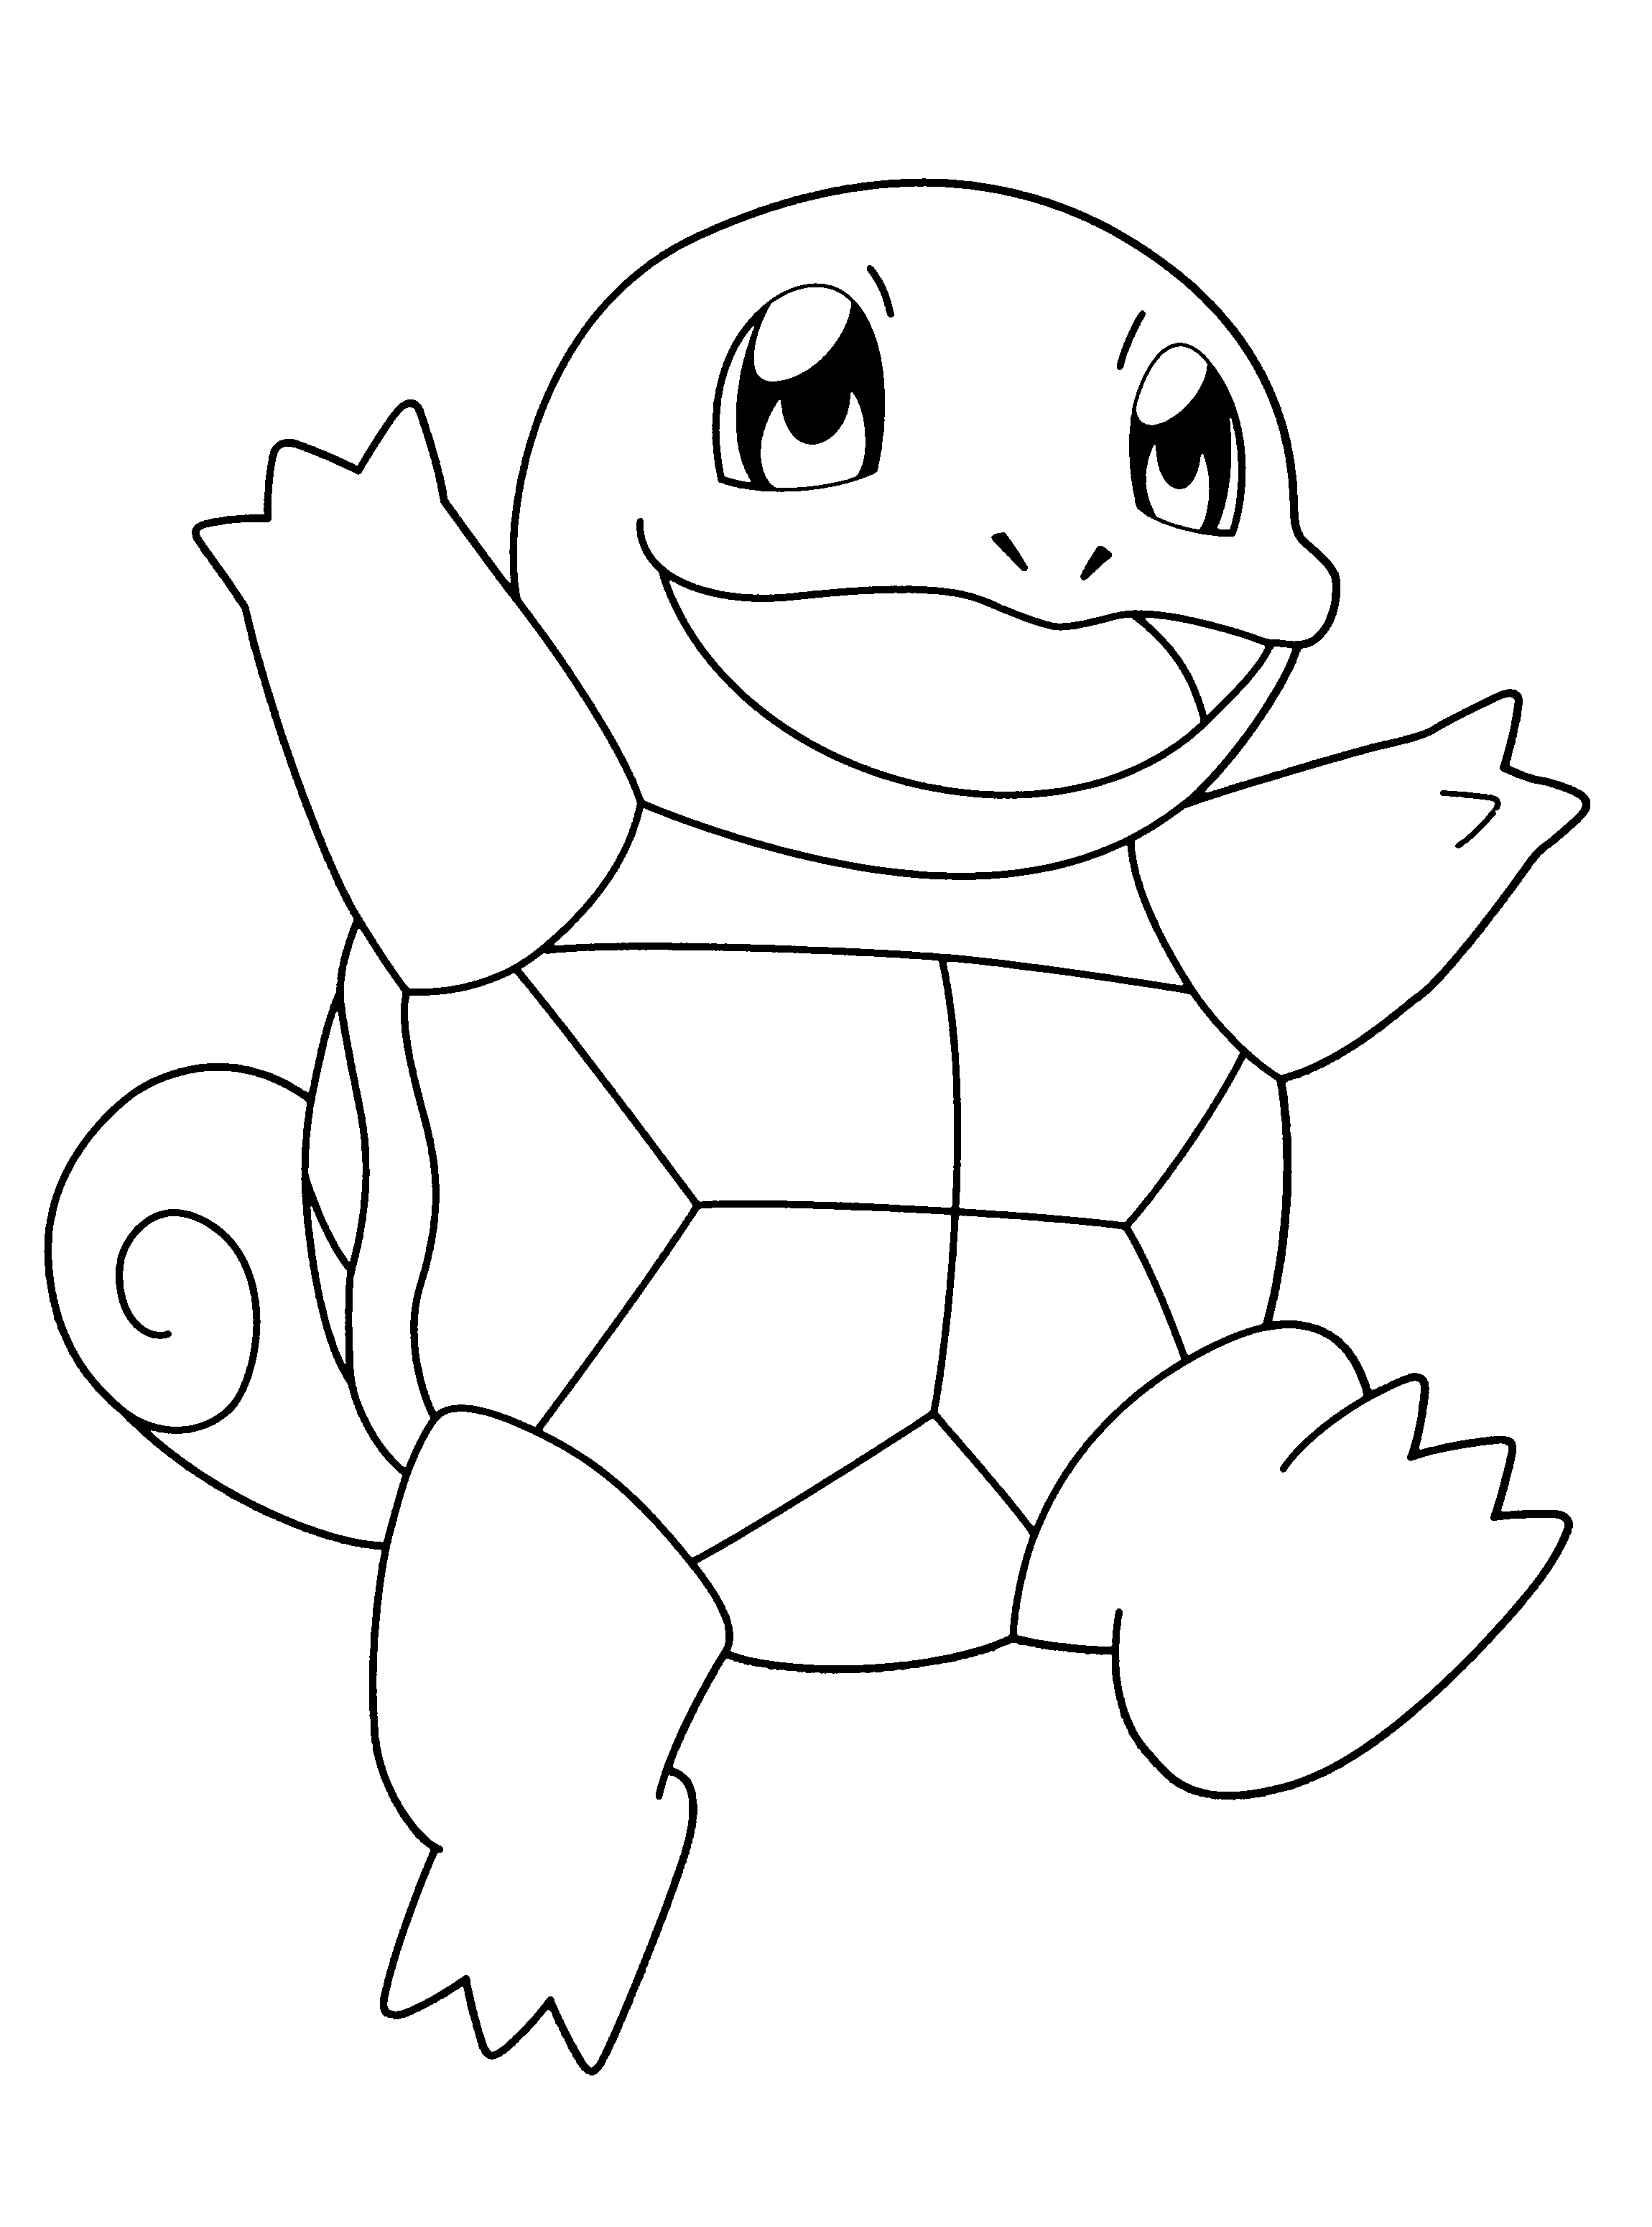 Pokemon coloring page with few details for kids